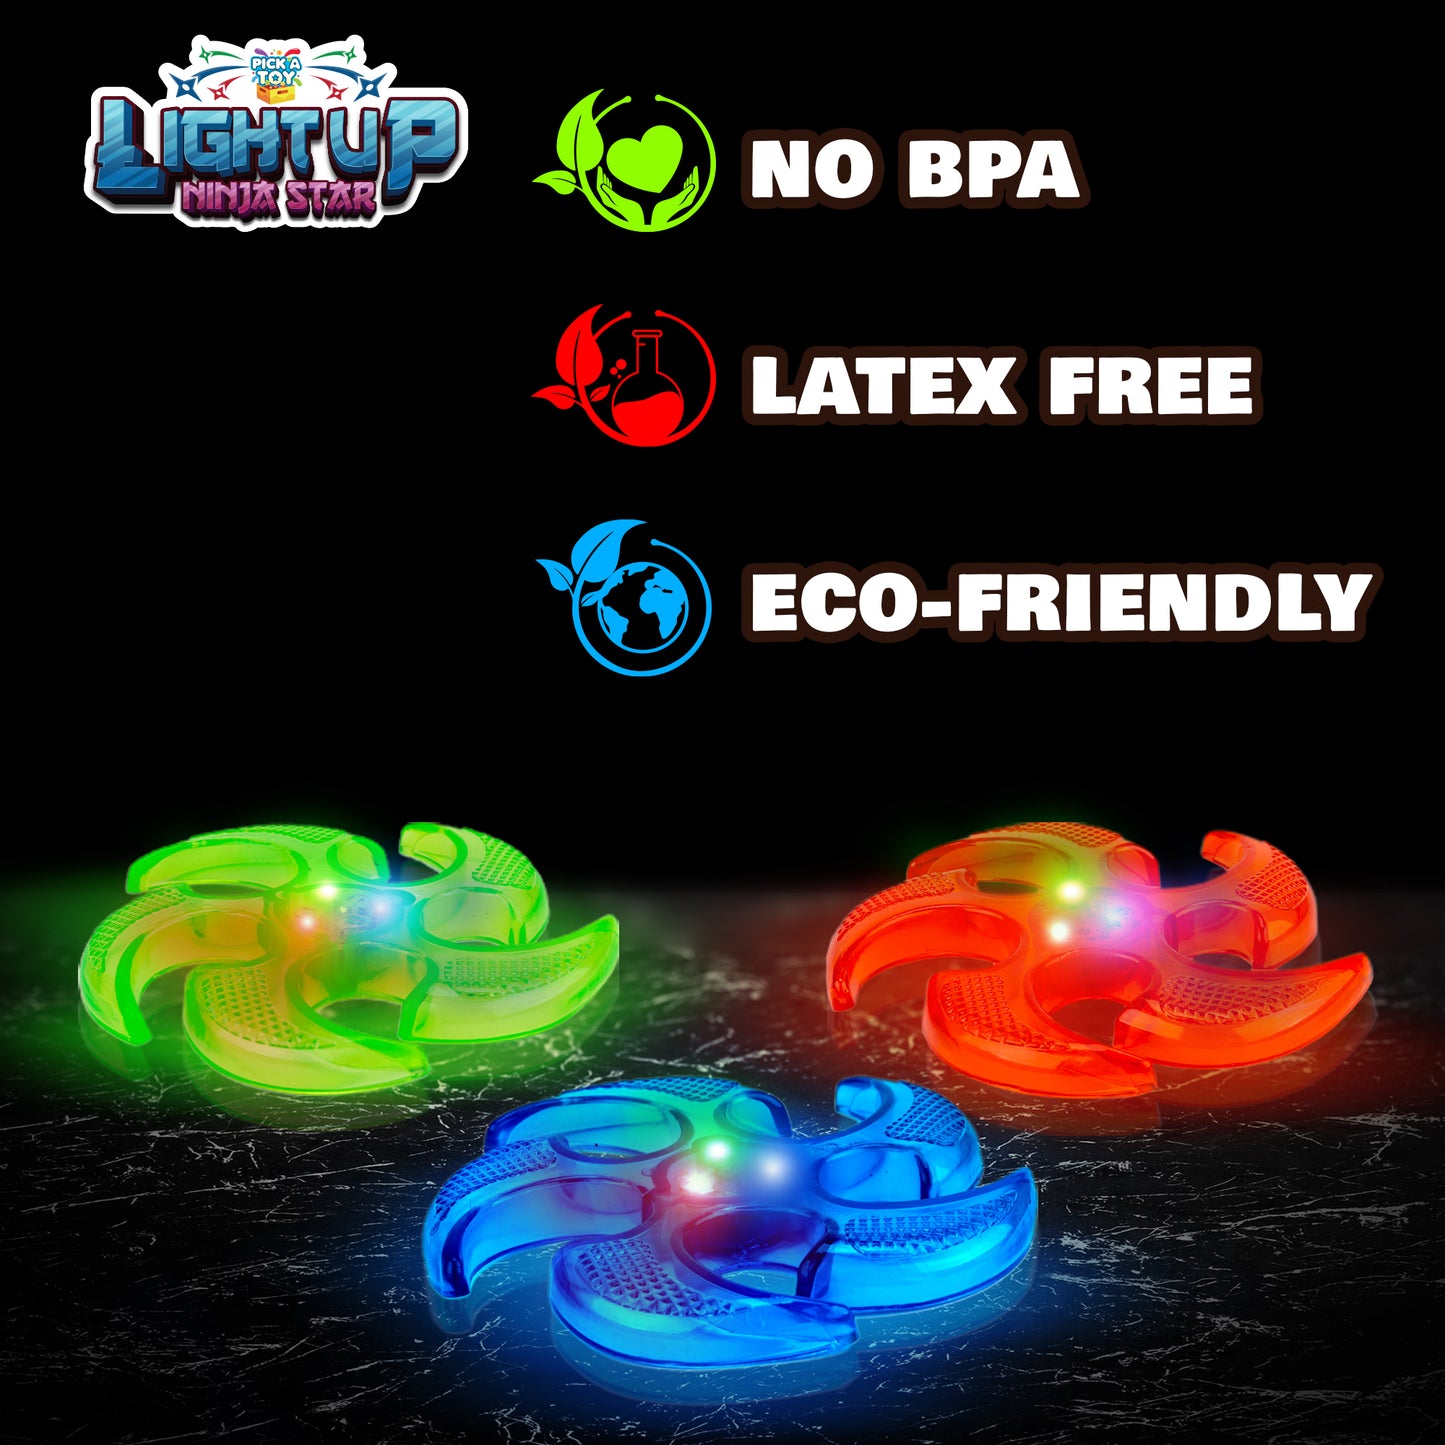 Light Up Ninja Flyers Set, 3 LED Electronic Stars, Heavy Duty Rubber Throwing Discs, Fun and Interactive Kids Toys for Tossing, Games, and Play, 3 Colors, Includes Gift Box - Pick A Toy